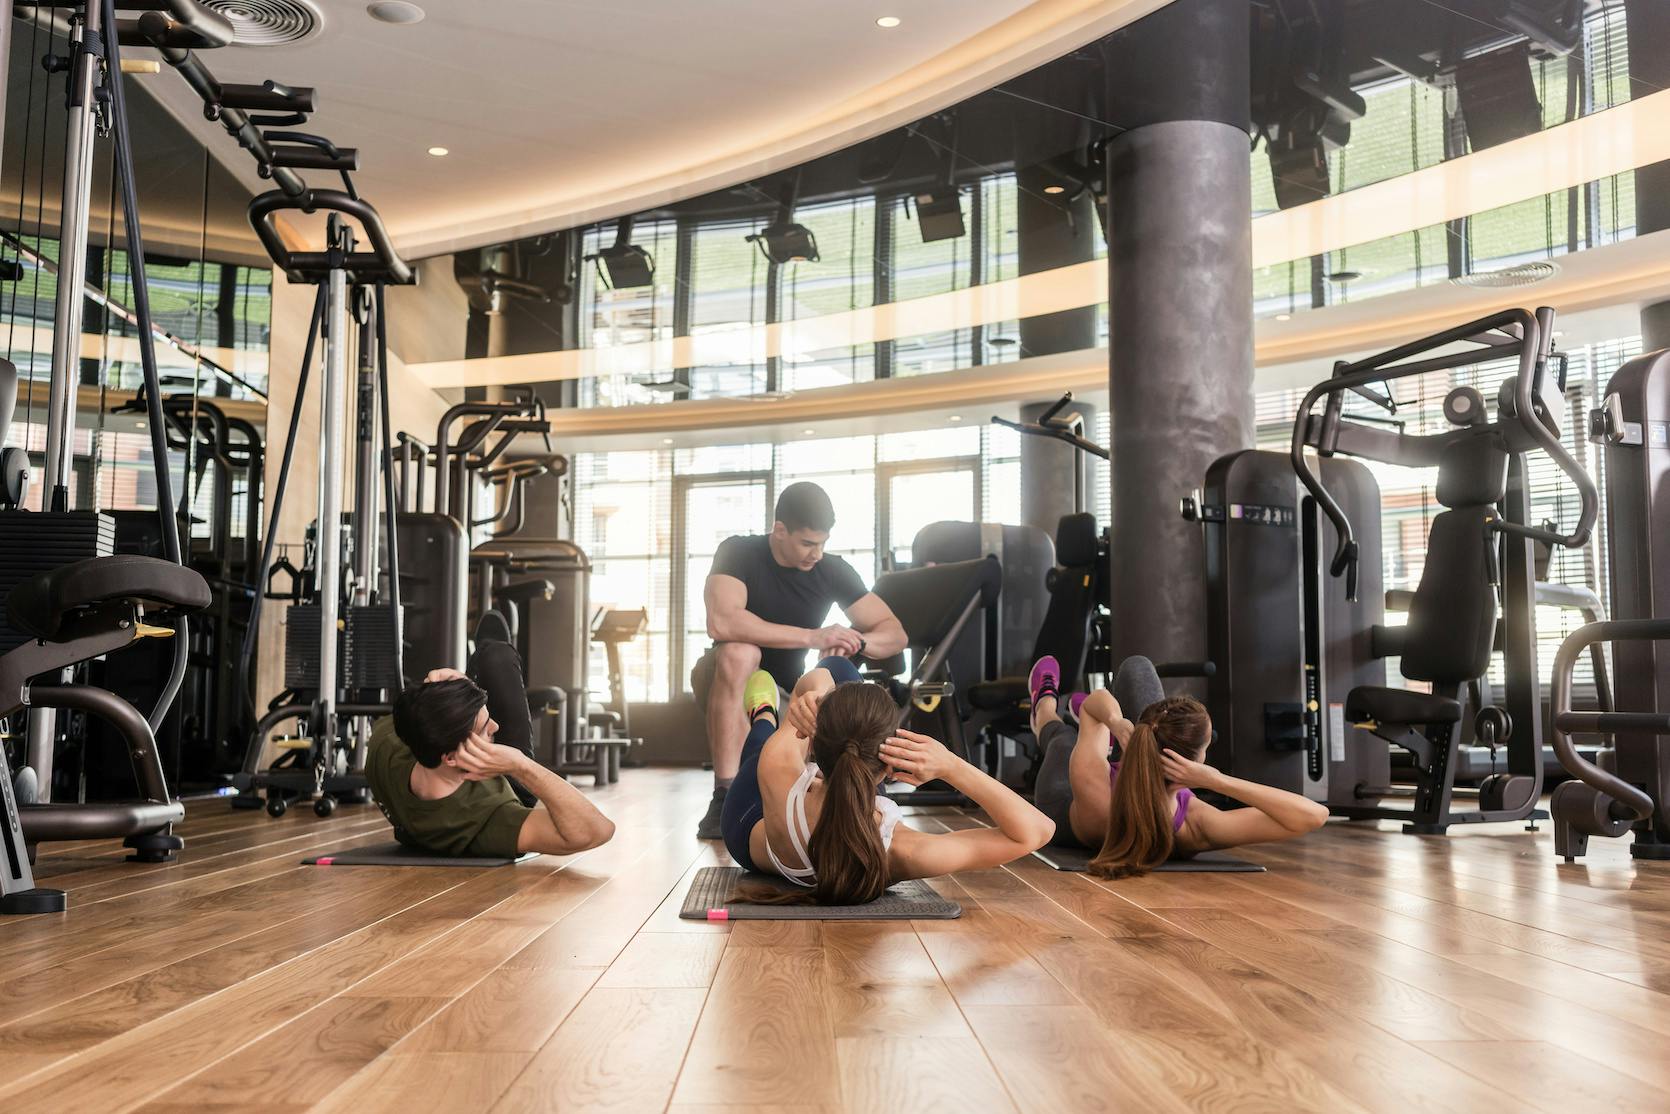 People working out in a well-rounded gym with weights and cardio equipment.